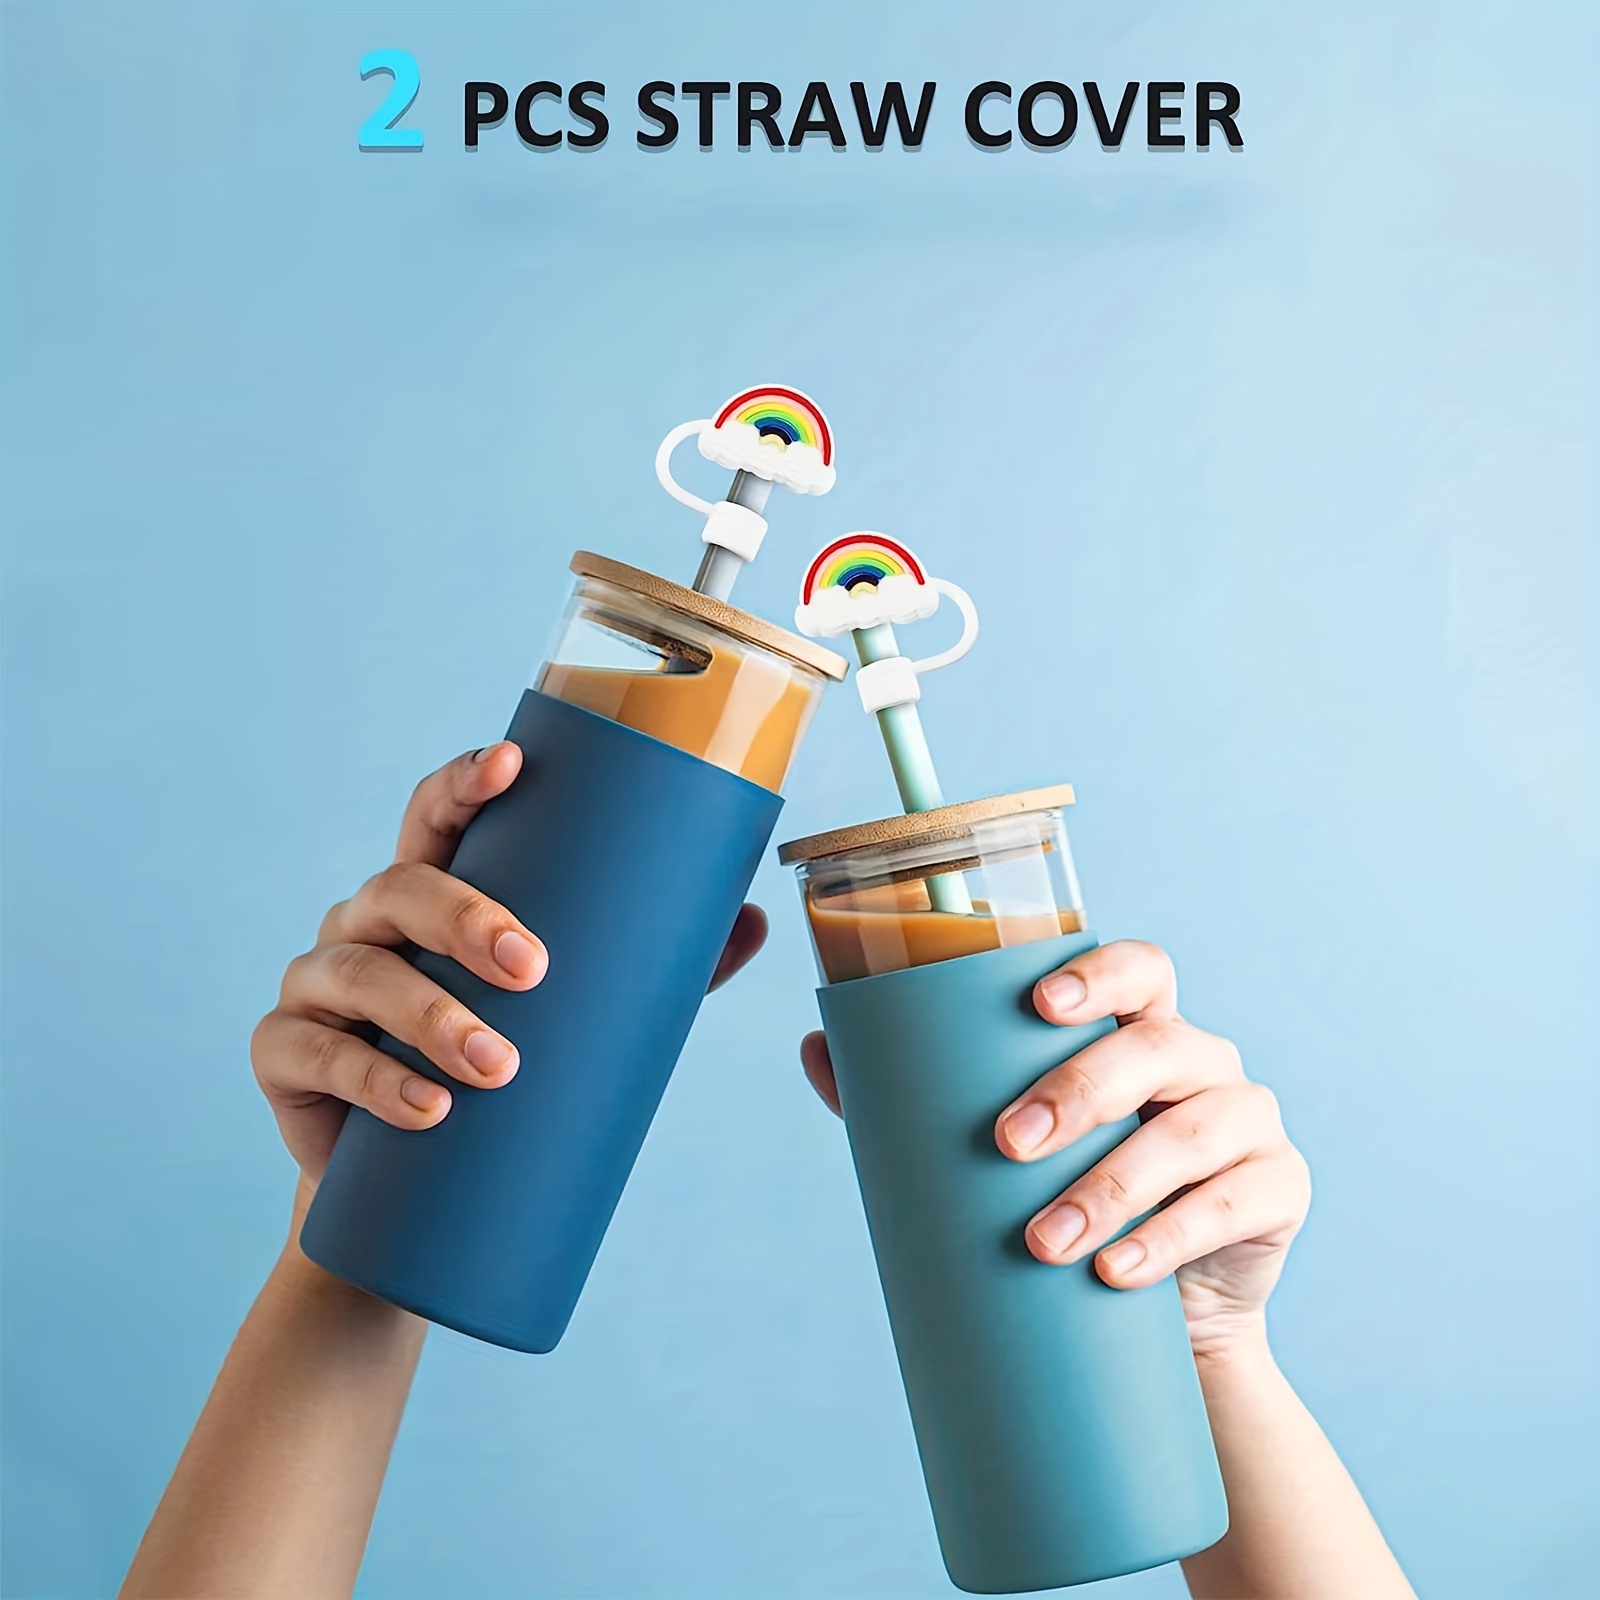 Straw Cover, Silicone Straw Cover For Stanley Cup - Protects